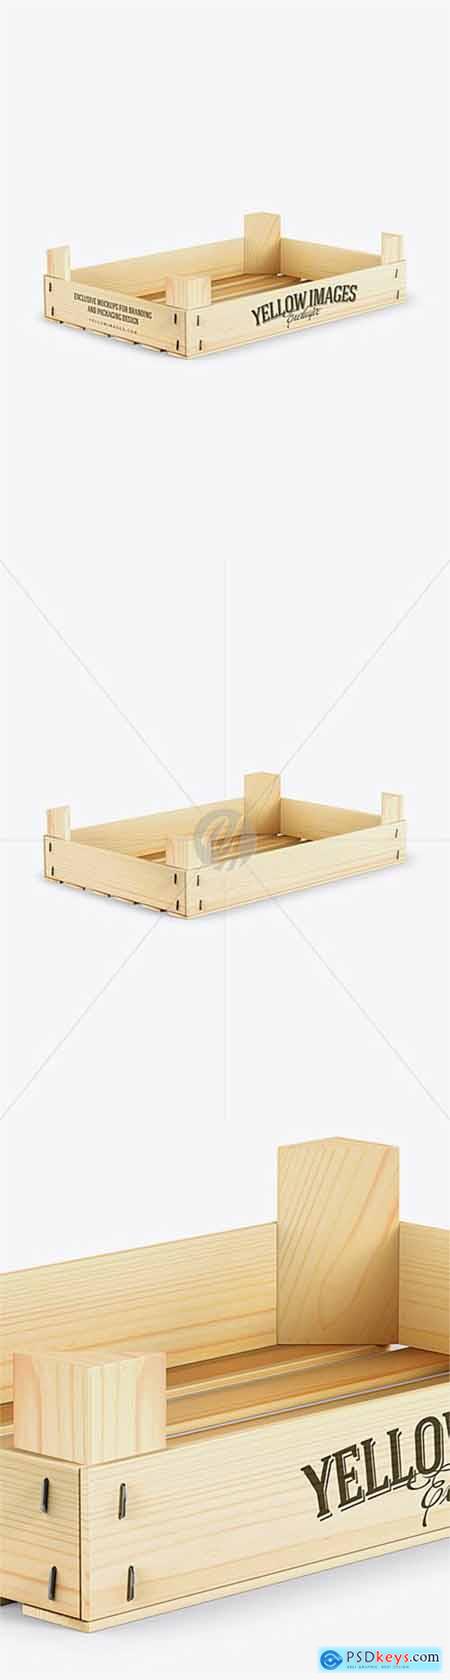 Empty Wooden Crate Mockup - Half Side View (High-Angle Shot) 30837